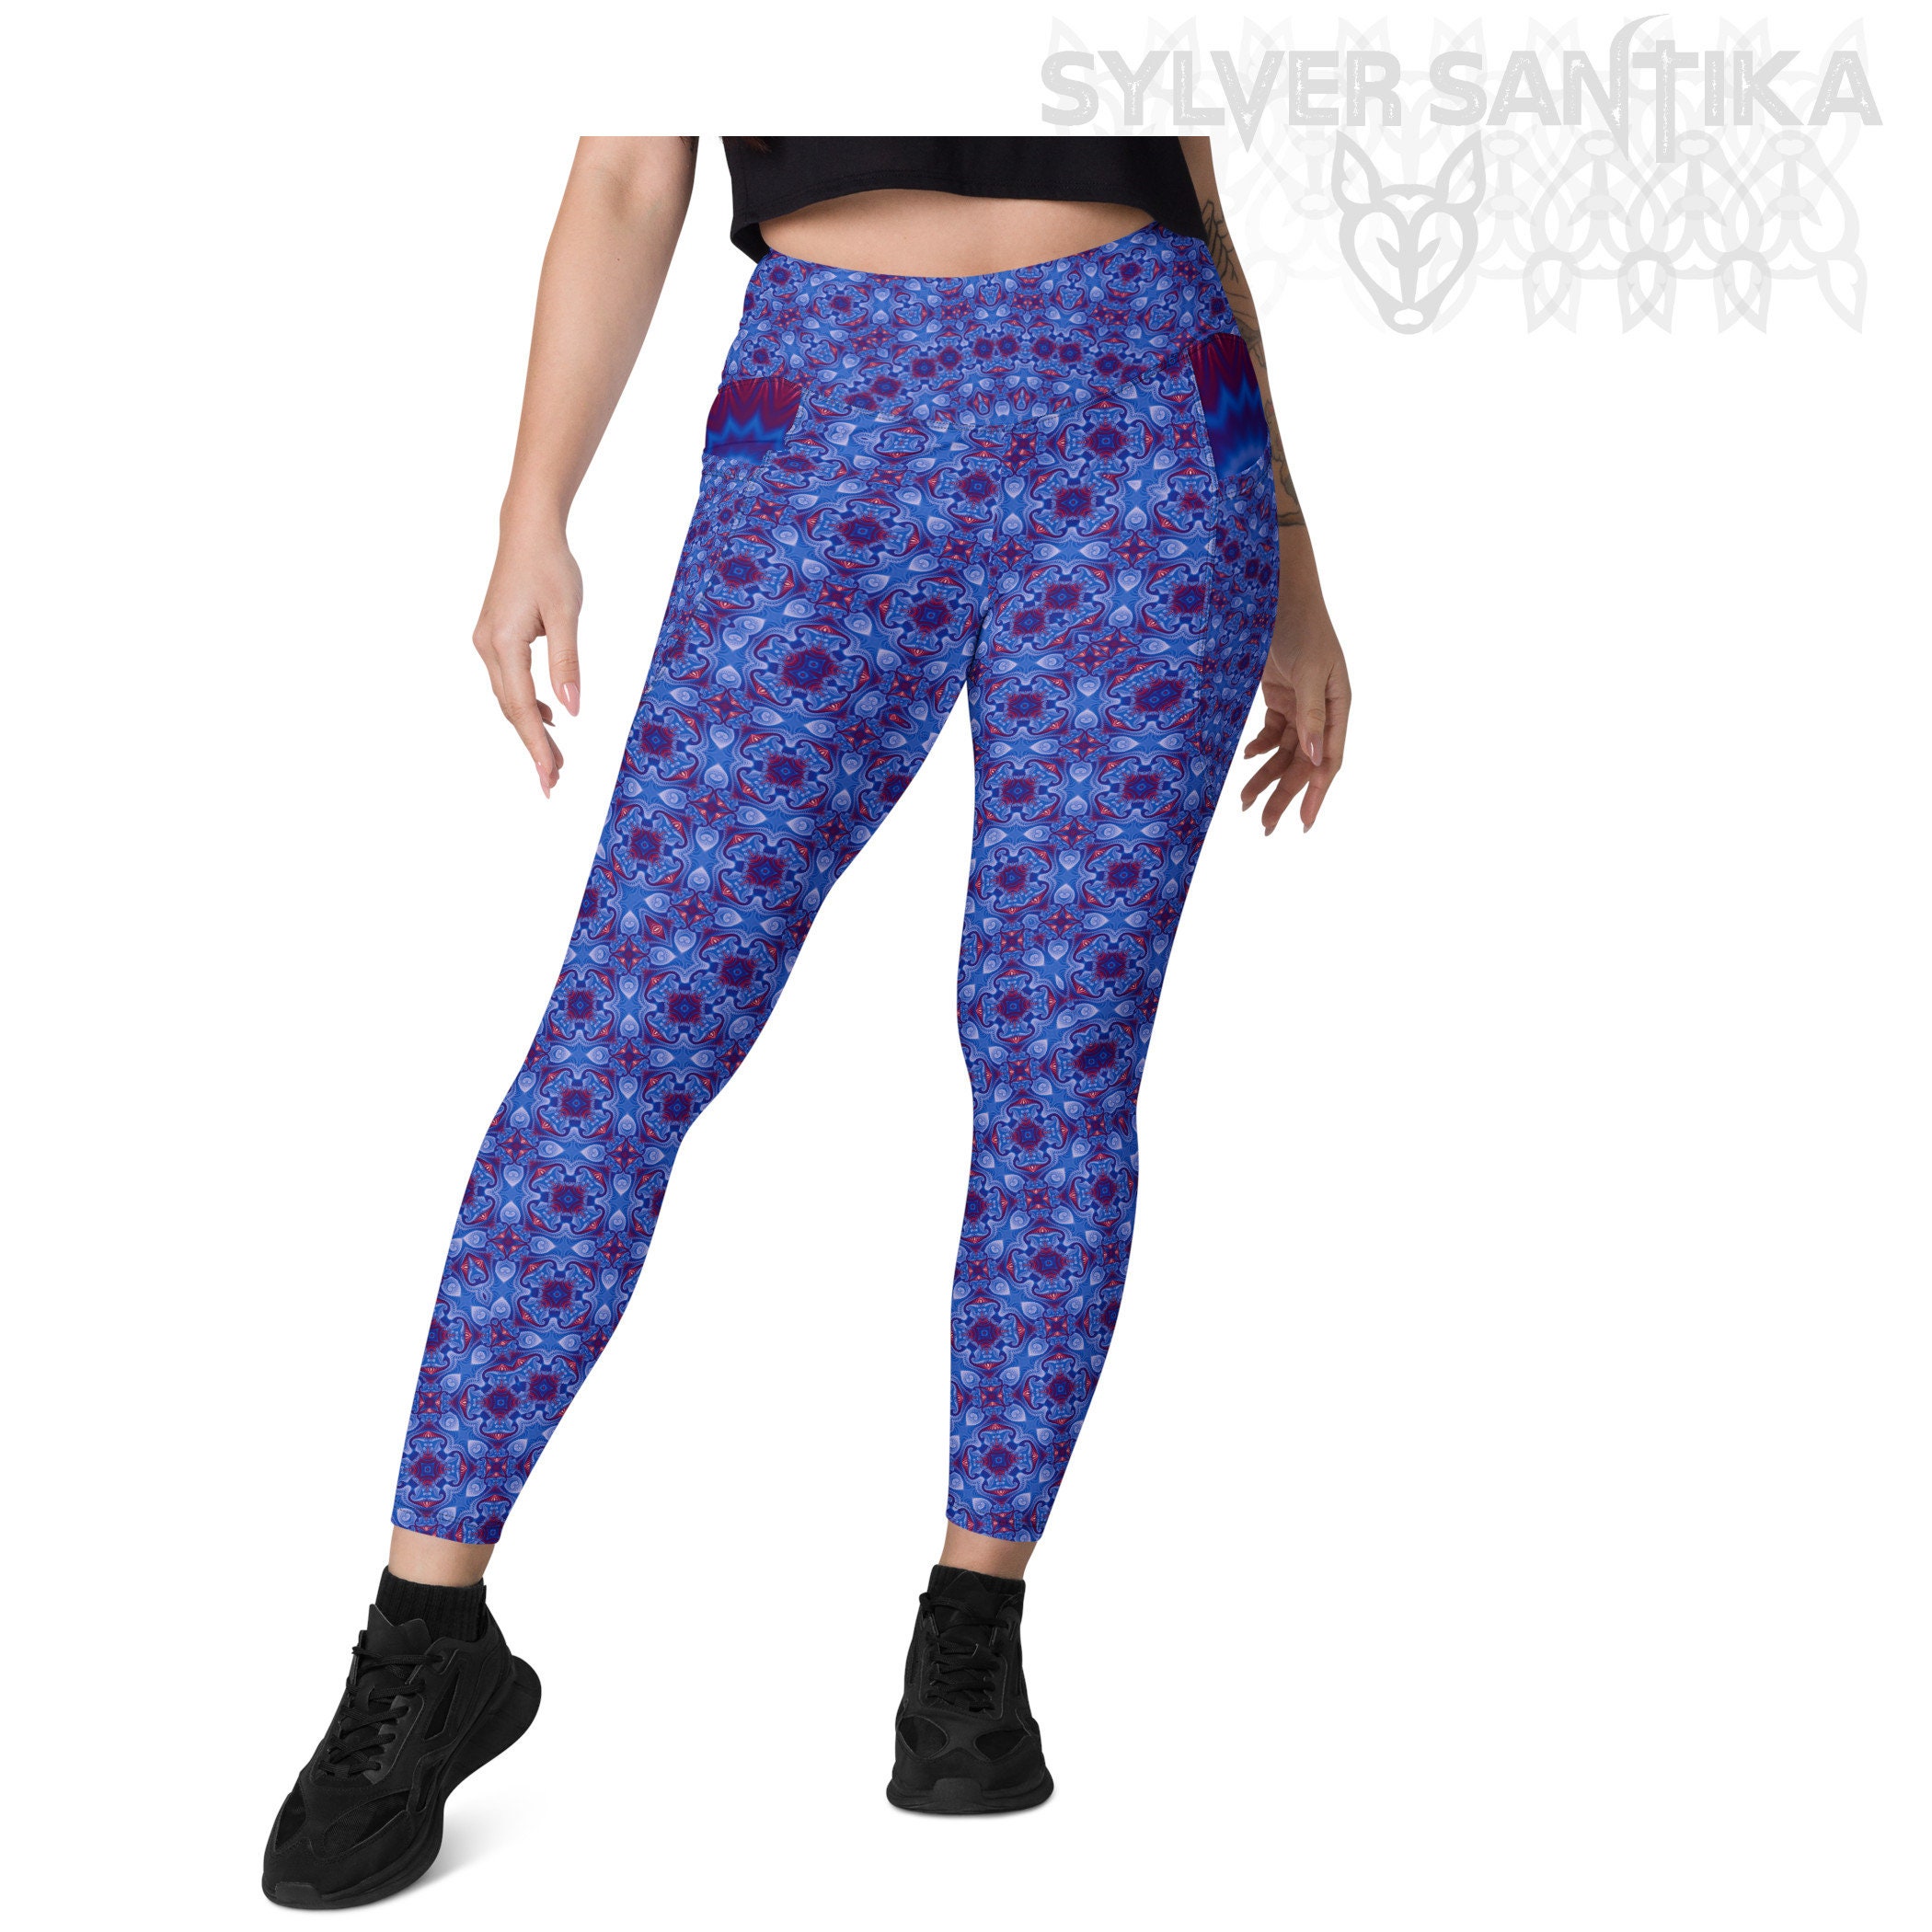 Colorful Leggings With Pockets, Multiple Sizes 2xs-6xl, Hippie